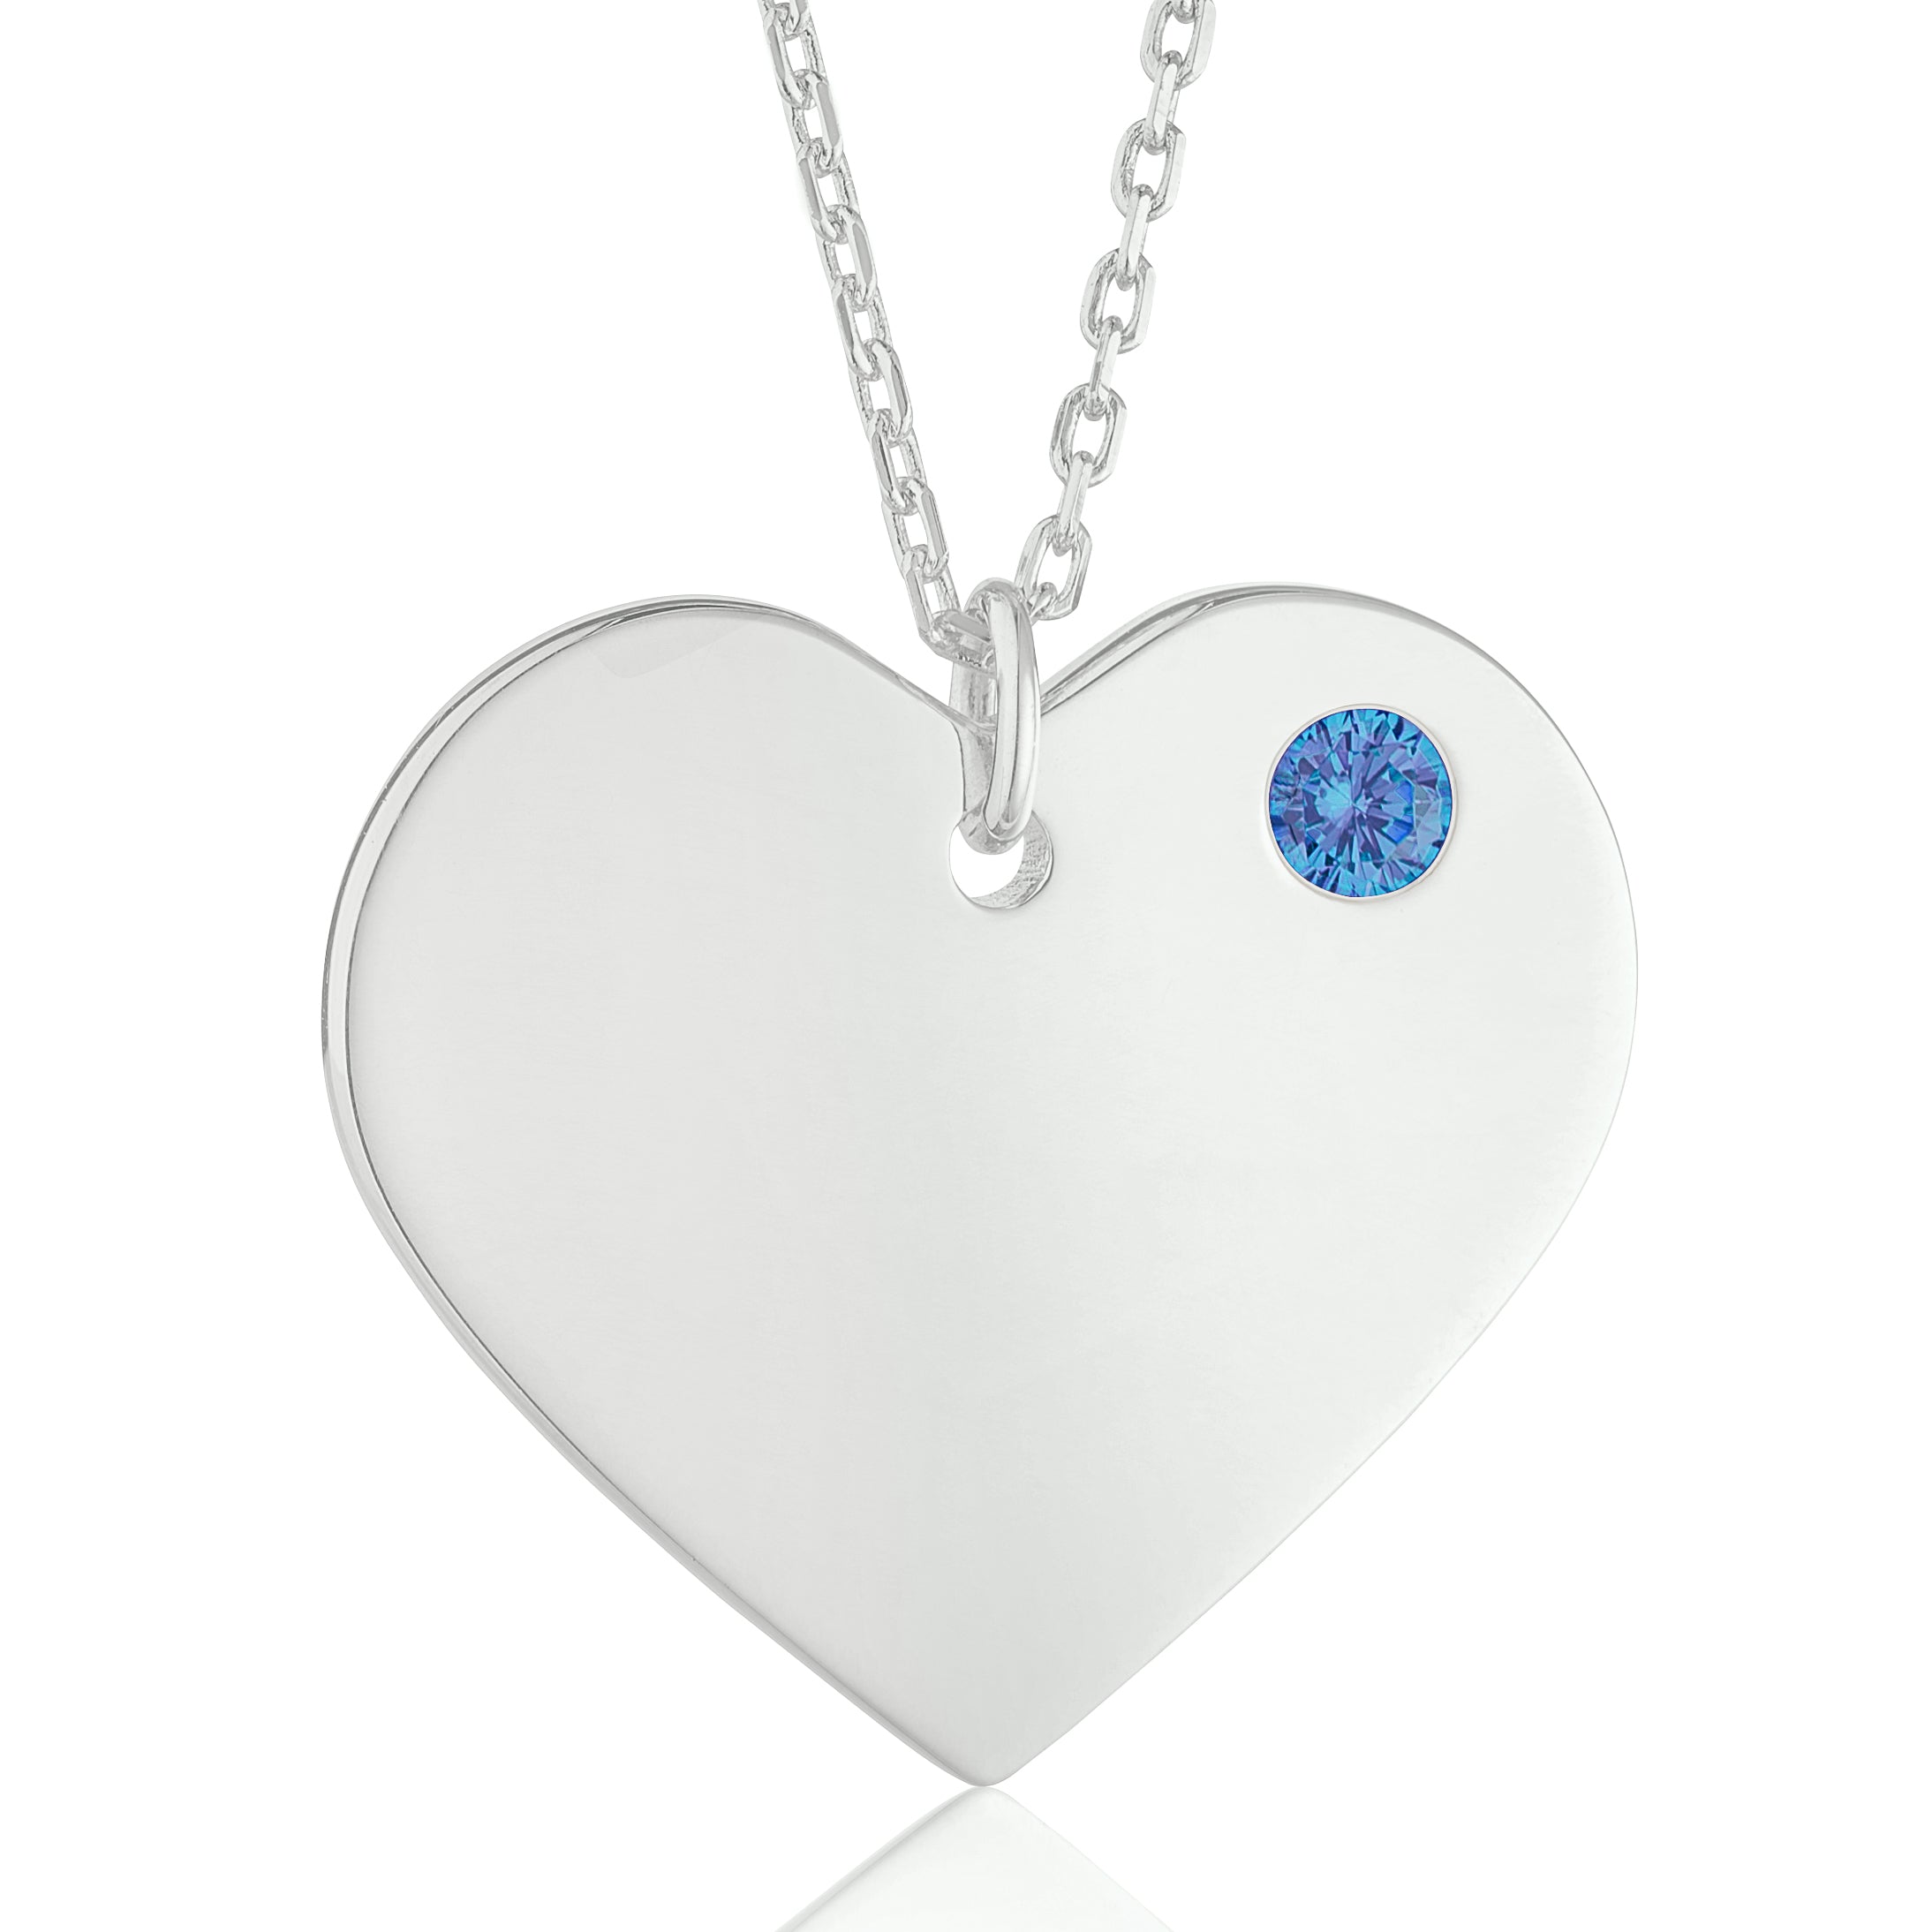 MASSETE Sterling Silver 925 Personalized Engraved Heart Necklace with Simulated Birthstone Custom Engravable Pendant for Women and Girls